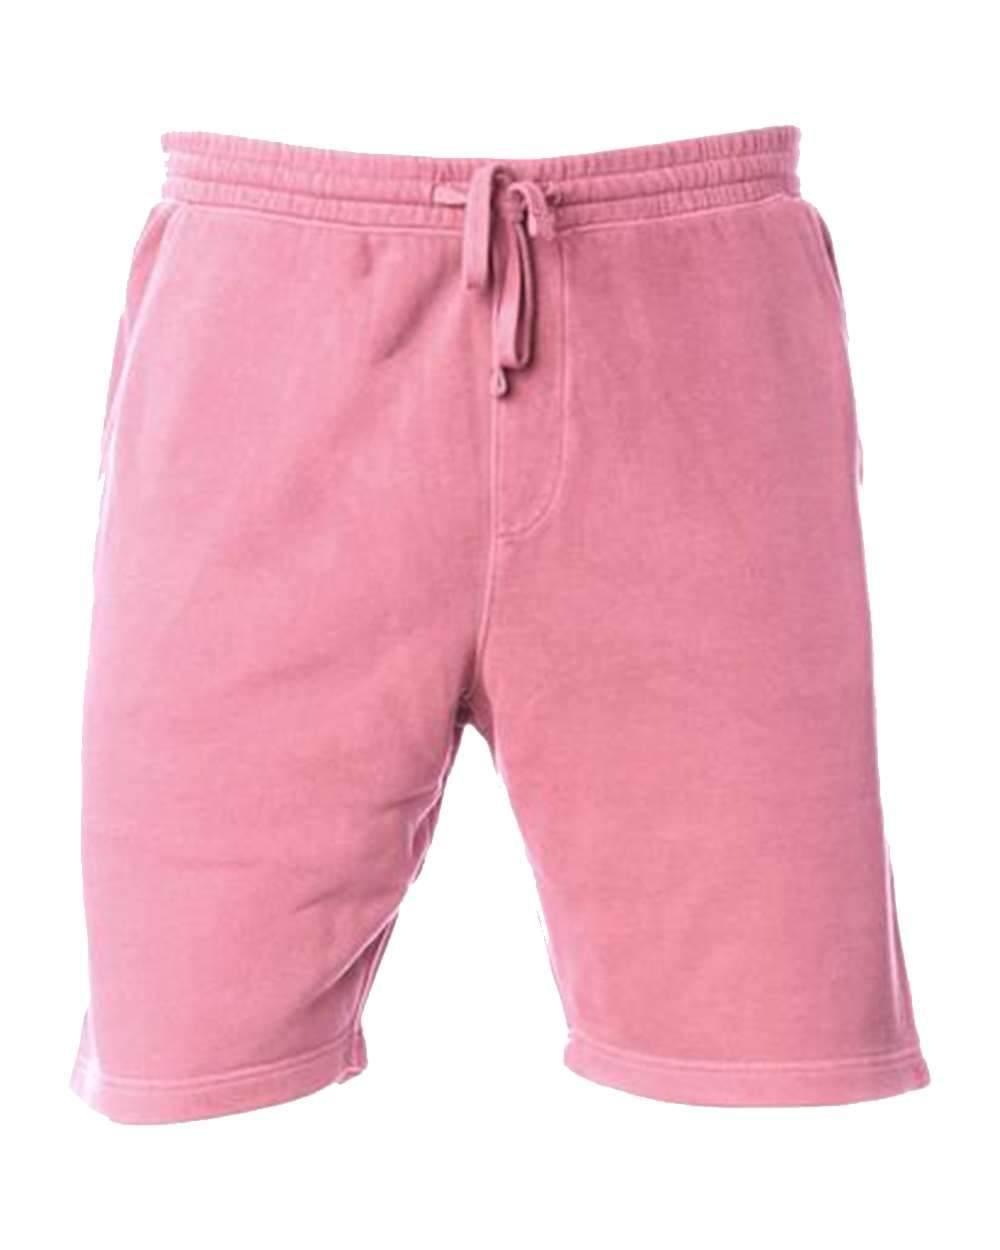 Blank Pigment Dyed Fleece Shorts - Constantly Create Shop